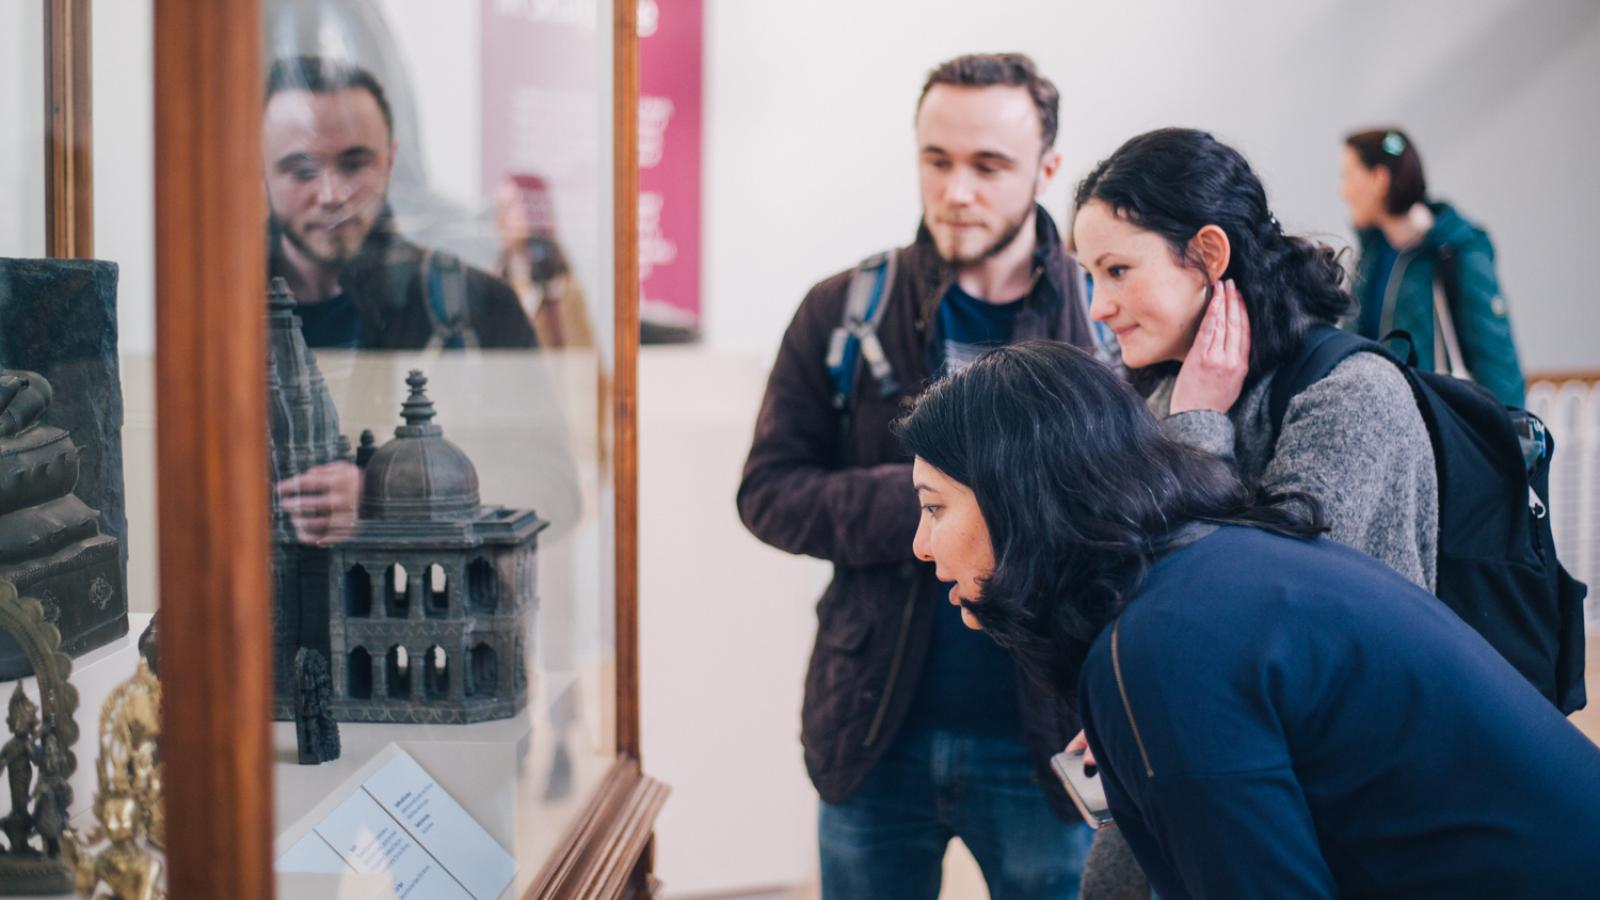 People in a museum setting looking into objects in a glass cabinet